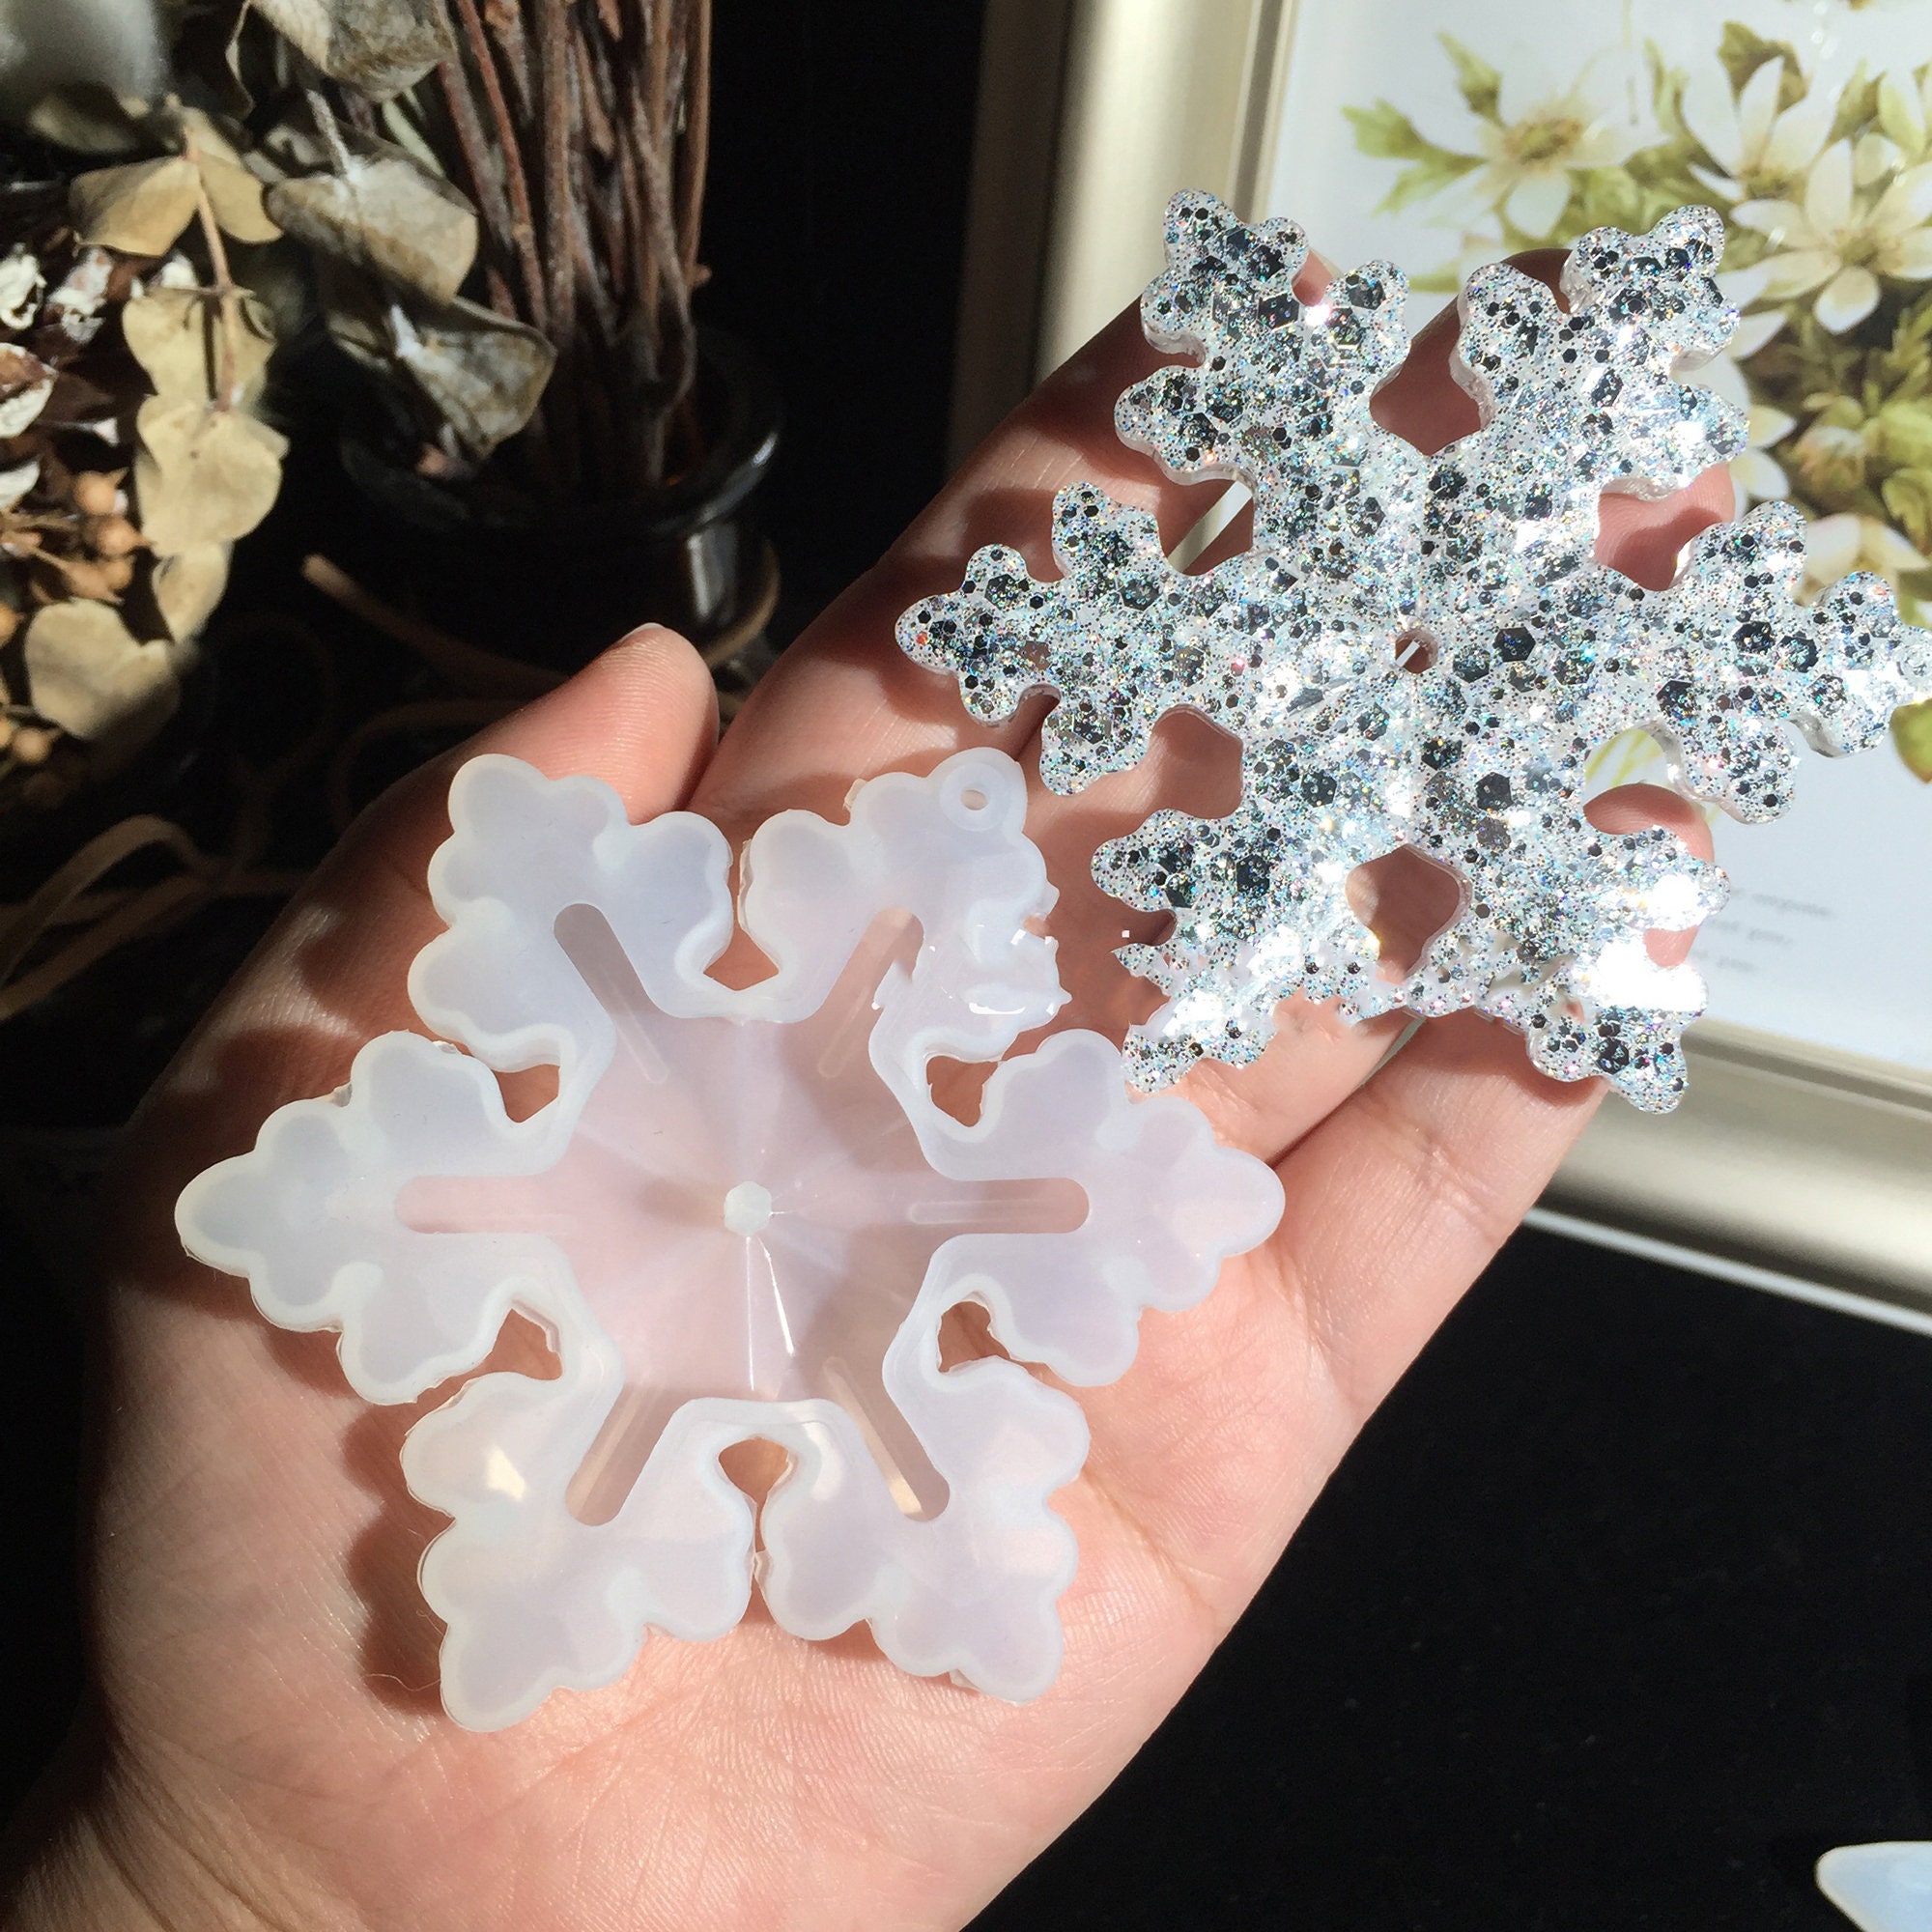 JS Molds Snowflake Silicone mold - The Compleat Sculptor